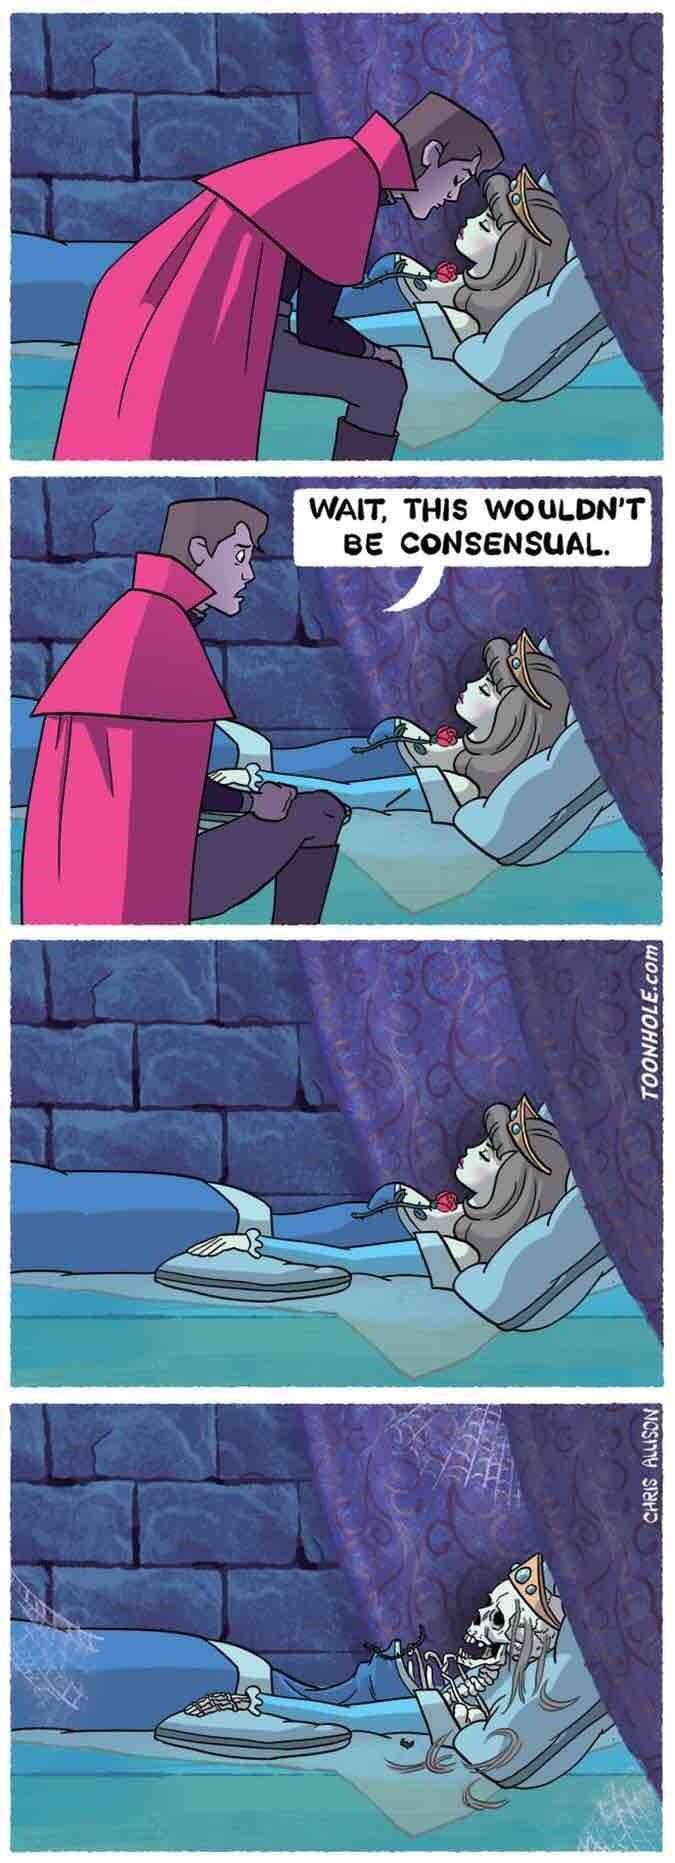 The naked truth about Sleeping Beauty 2018